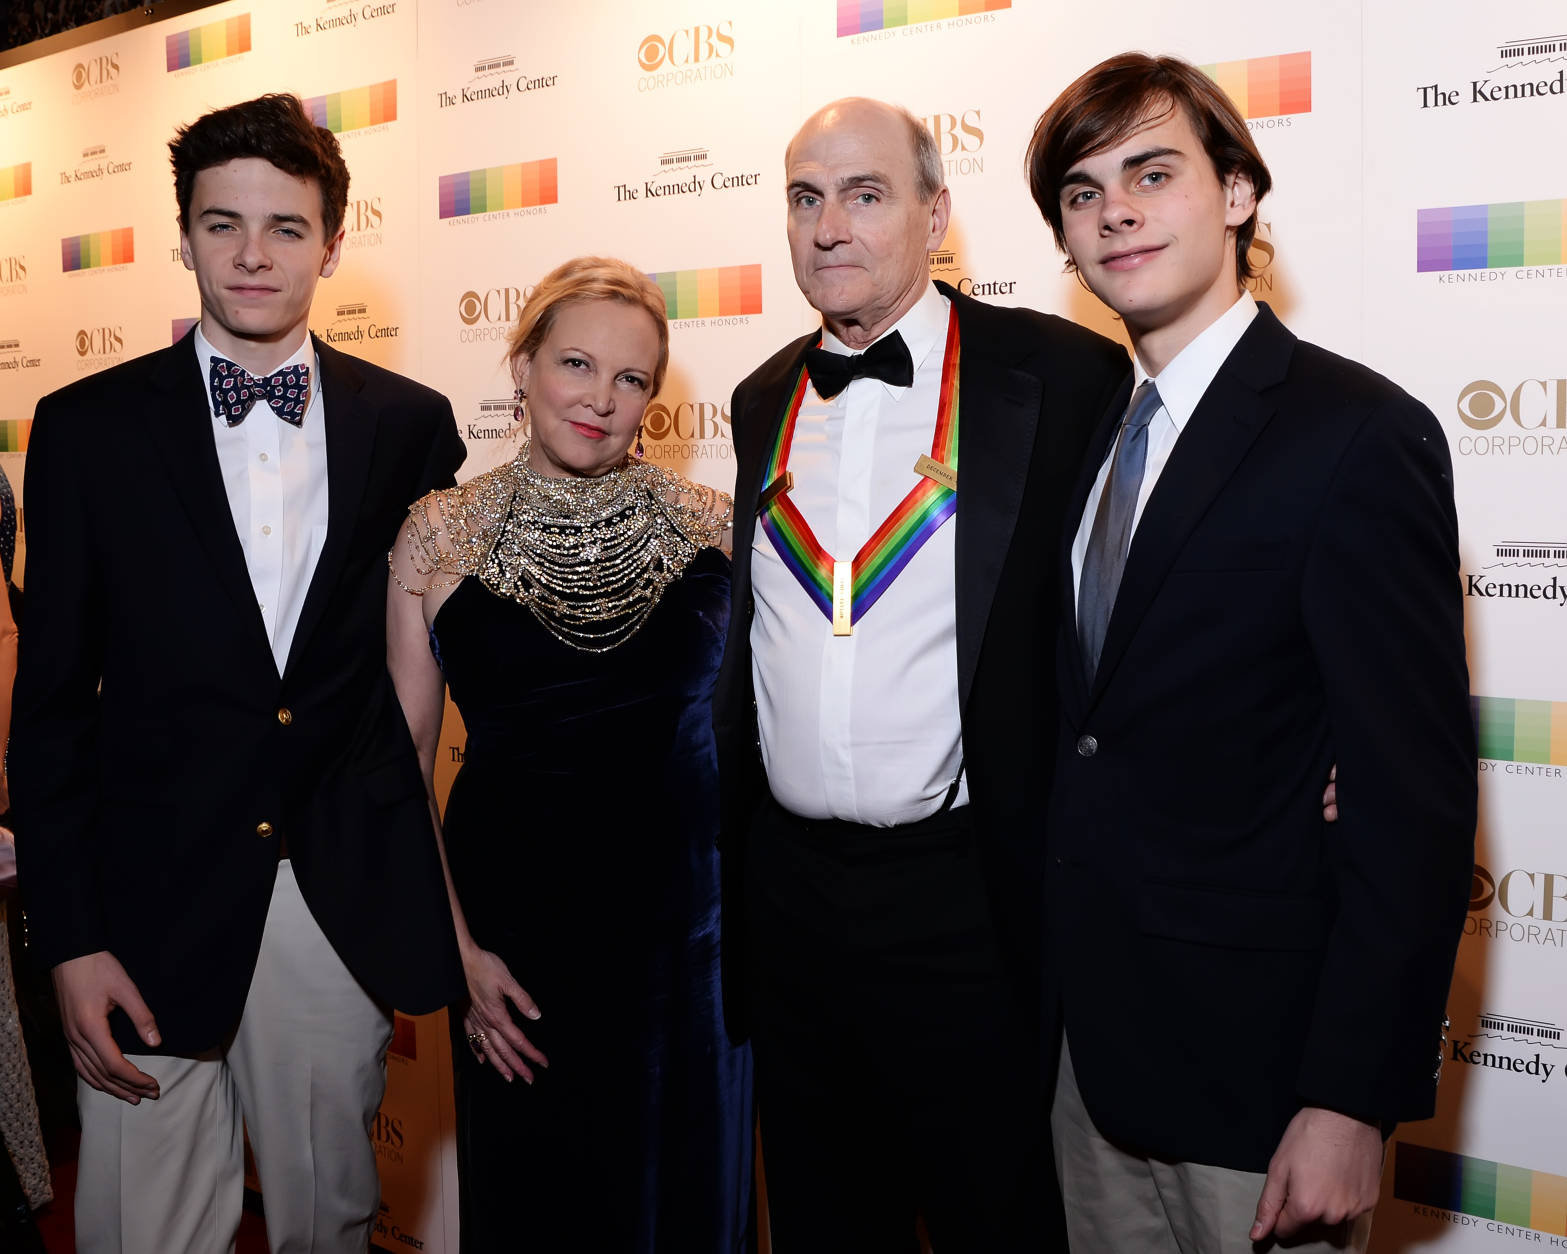 2016 Kennedy Center Honoree James Taylor with his wife Kim Taylor and their children. (Courtesy Shannon Finney, <a href="http://www.shannonfinneyphotography.com">www.shannonfinneyphotography.com</a>)